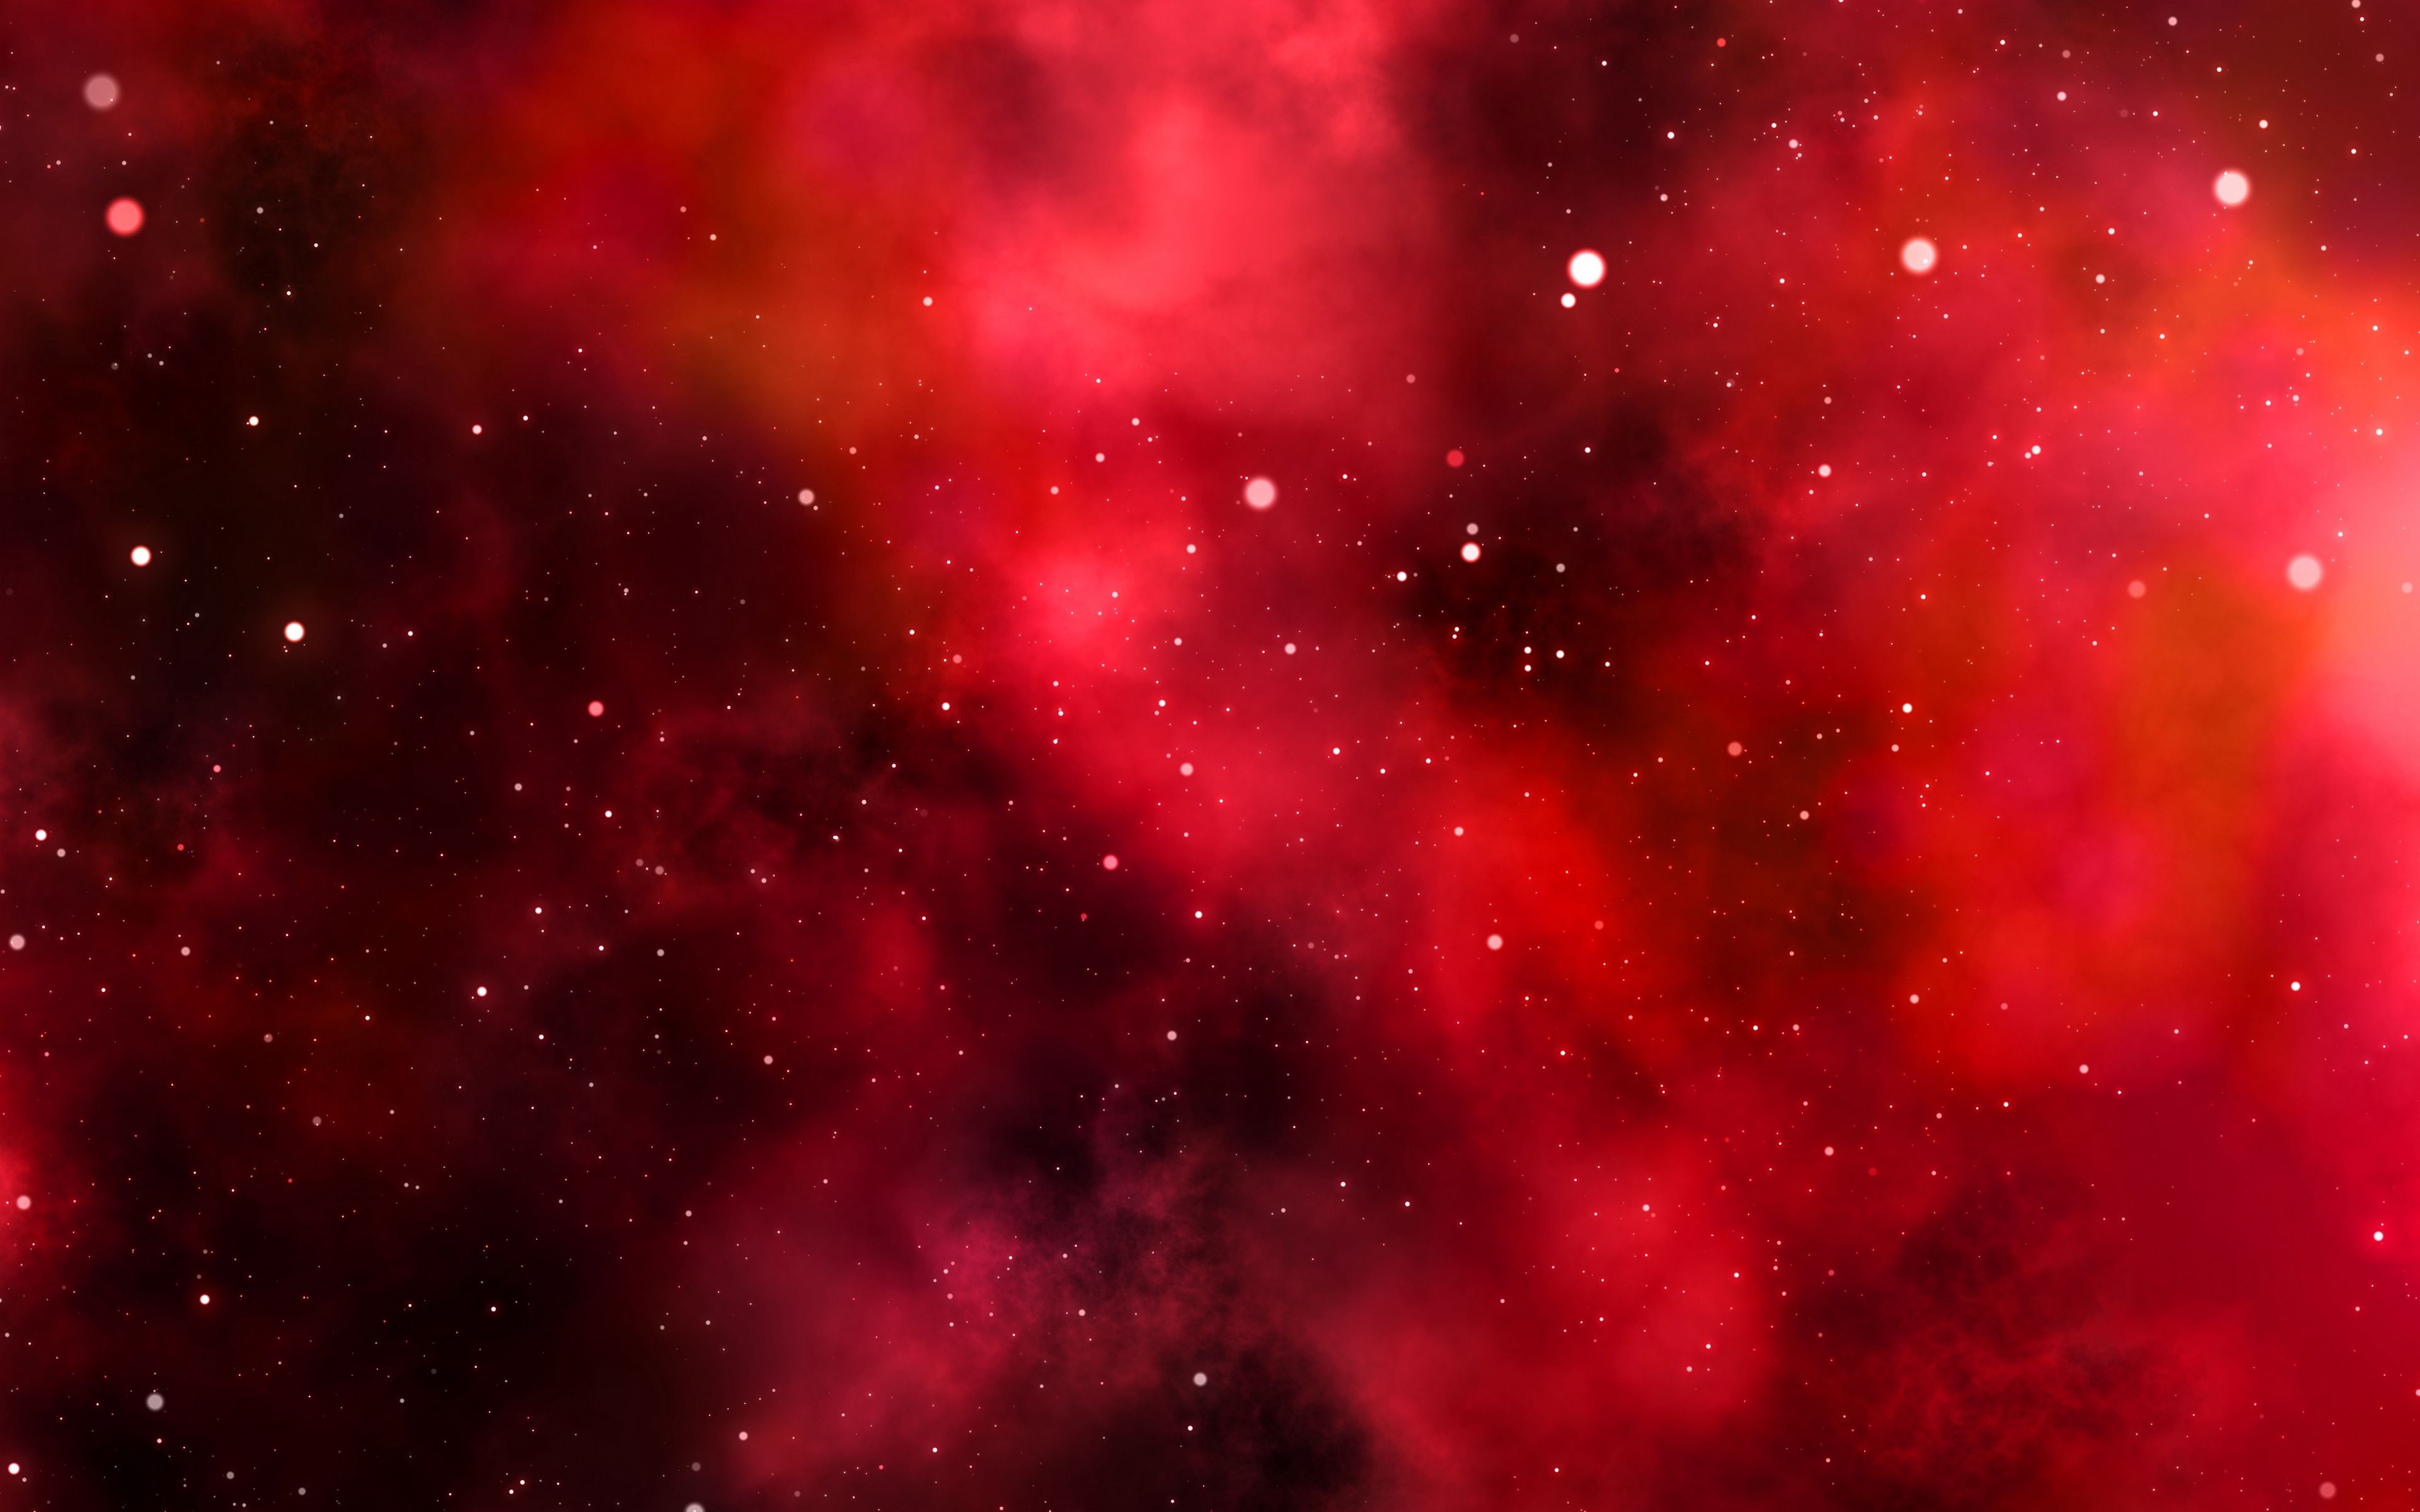 Galaxy Background Images, HD Pictures and Wallpaper For Free Download